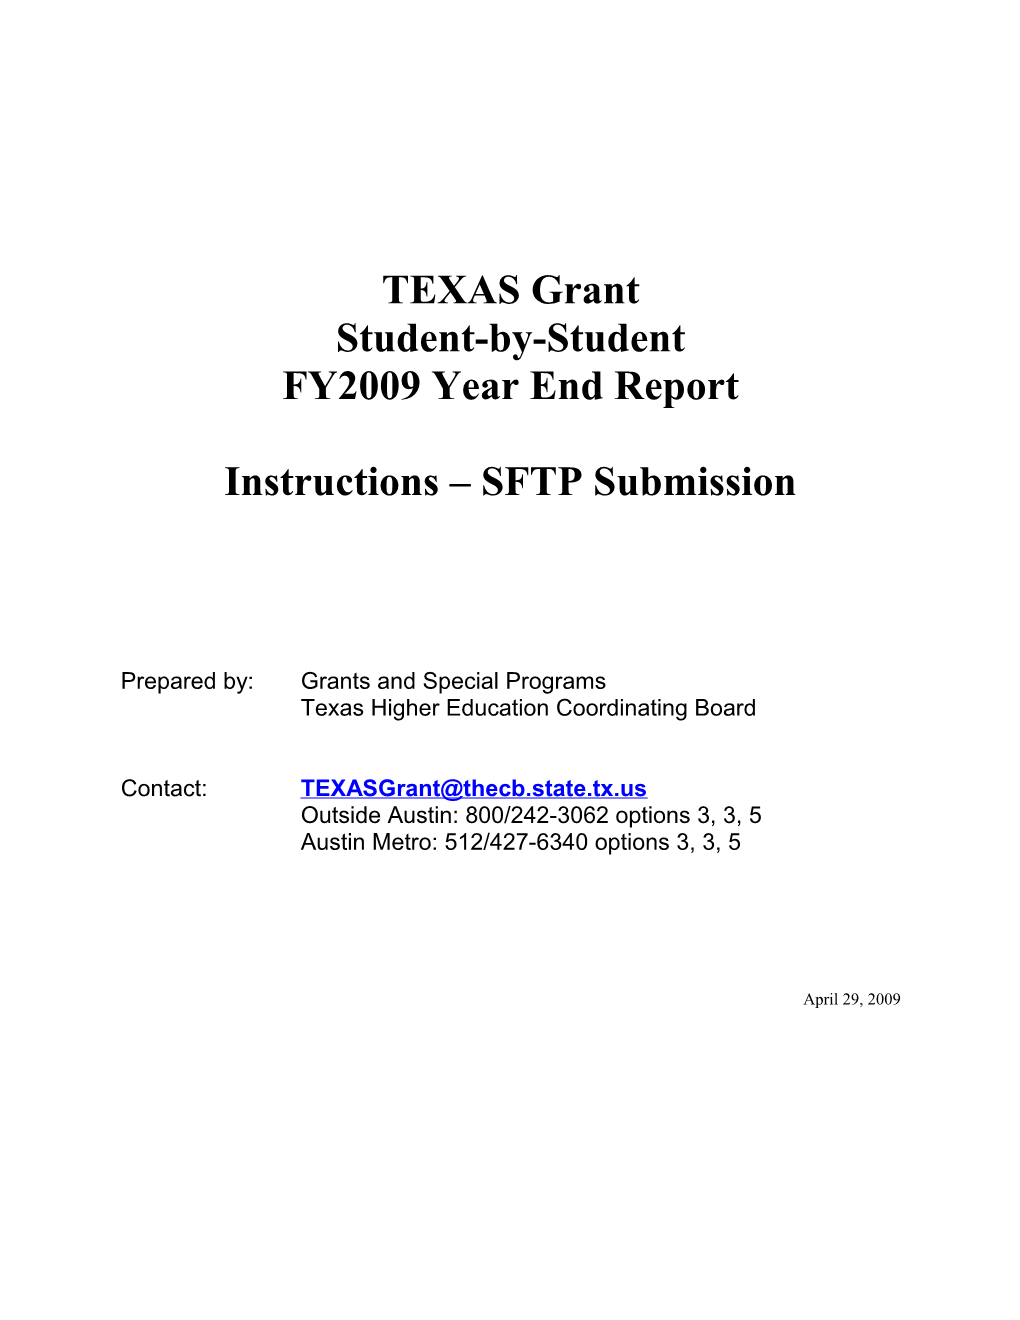 TEXAS Grant Sxs Year-End Report Instructions